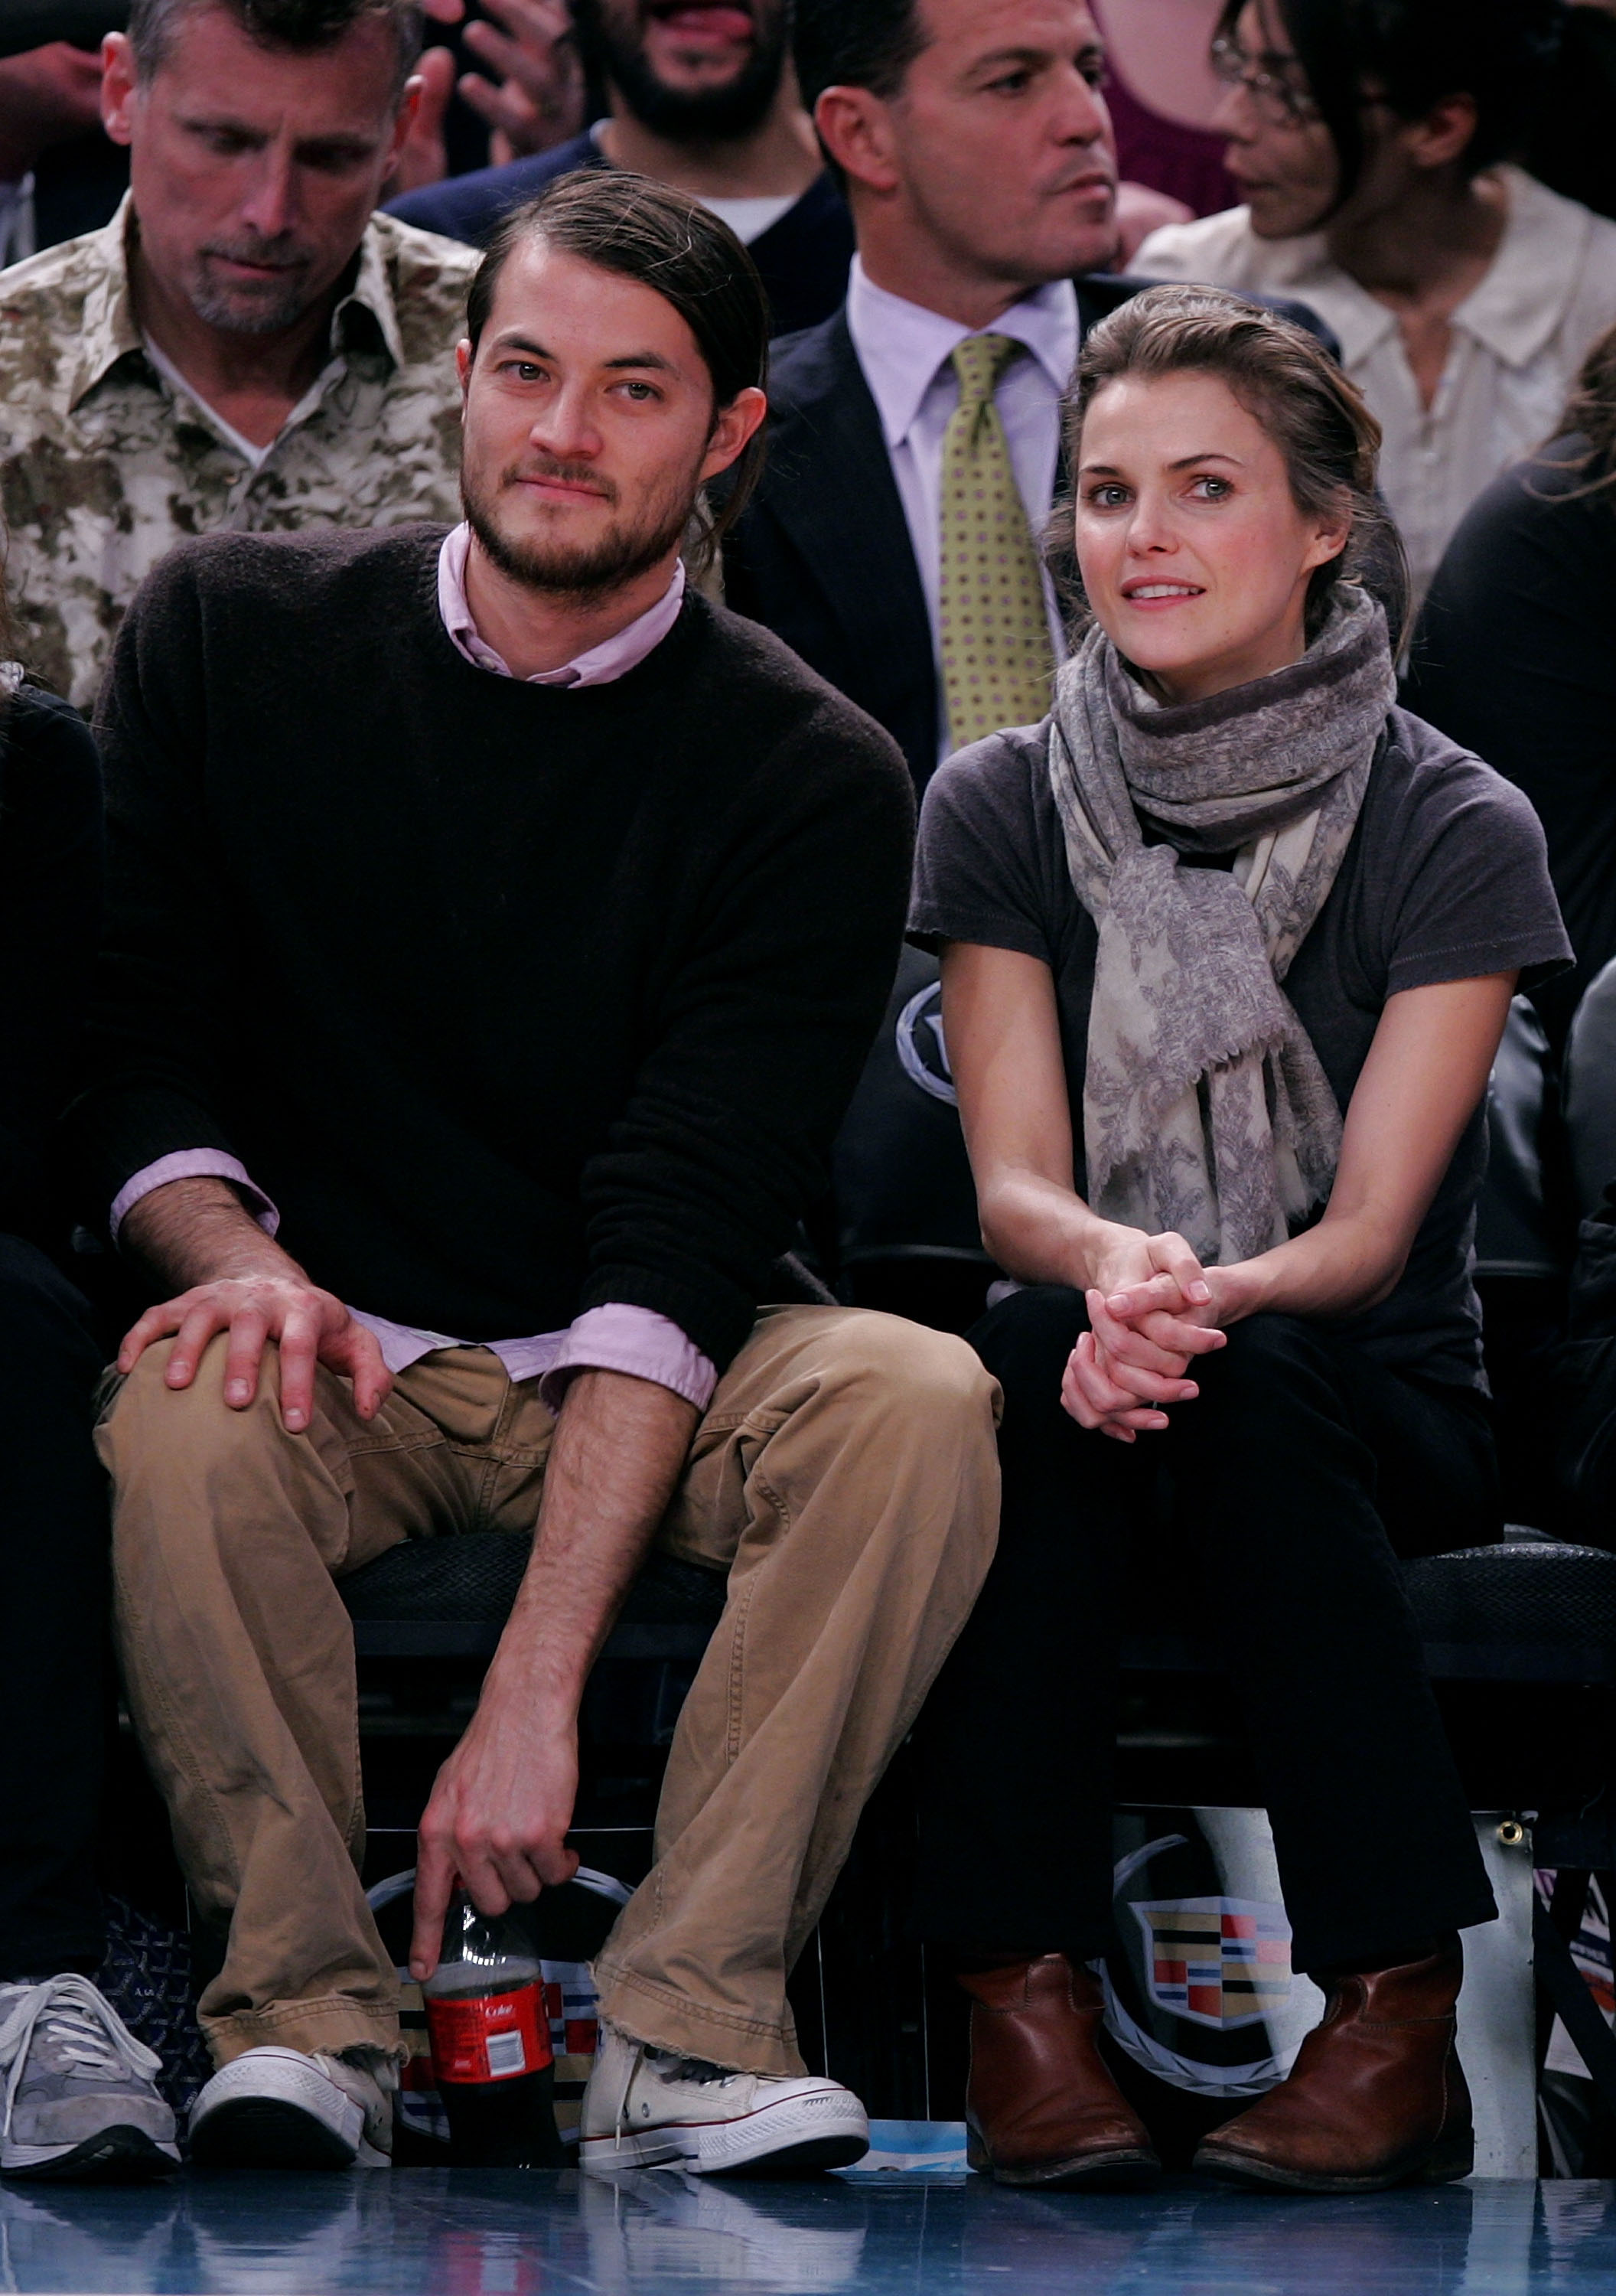 Keri Russell and Shane Dreary attend Dallas Mavericks vs New York Knicks game at Madison Square Garden on December 10, 2007, in New York City, New York. | Source: Getty Images